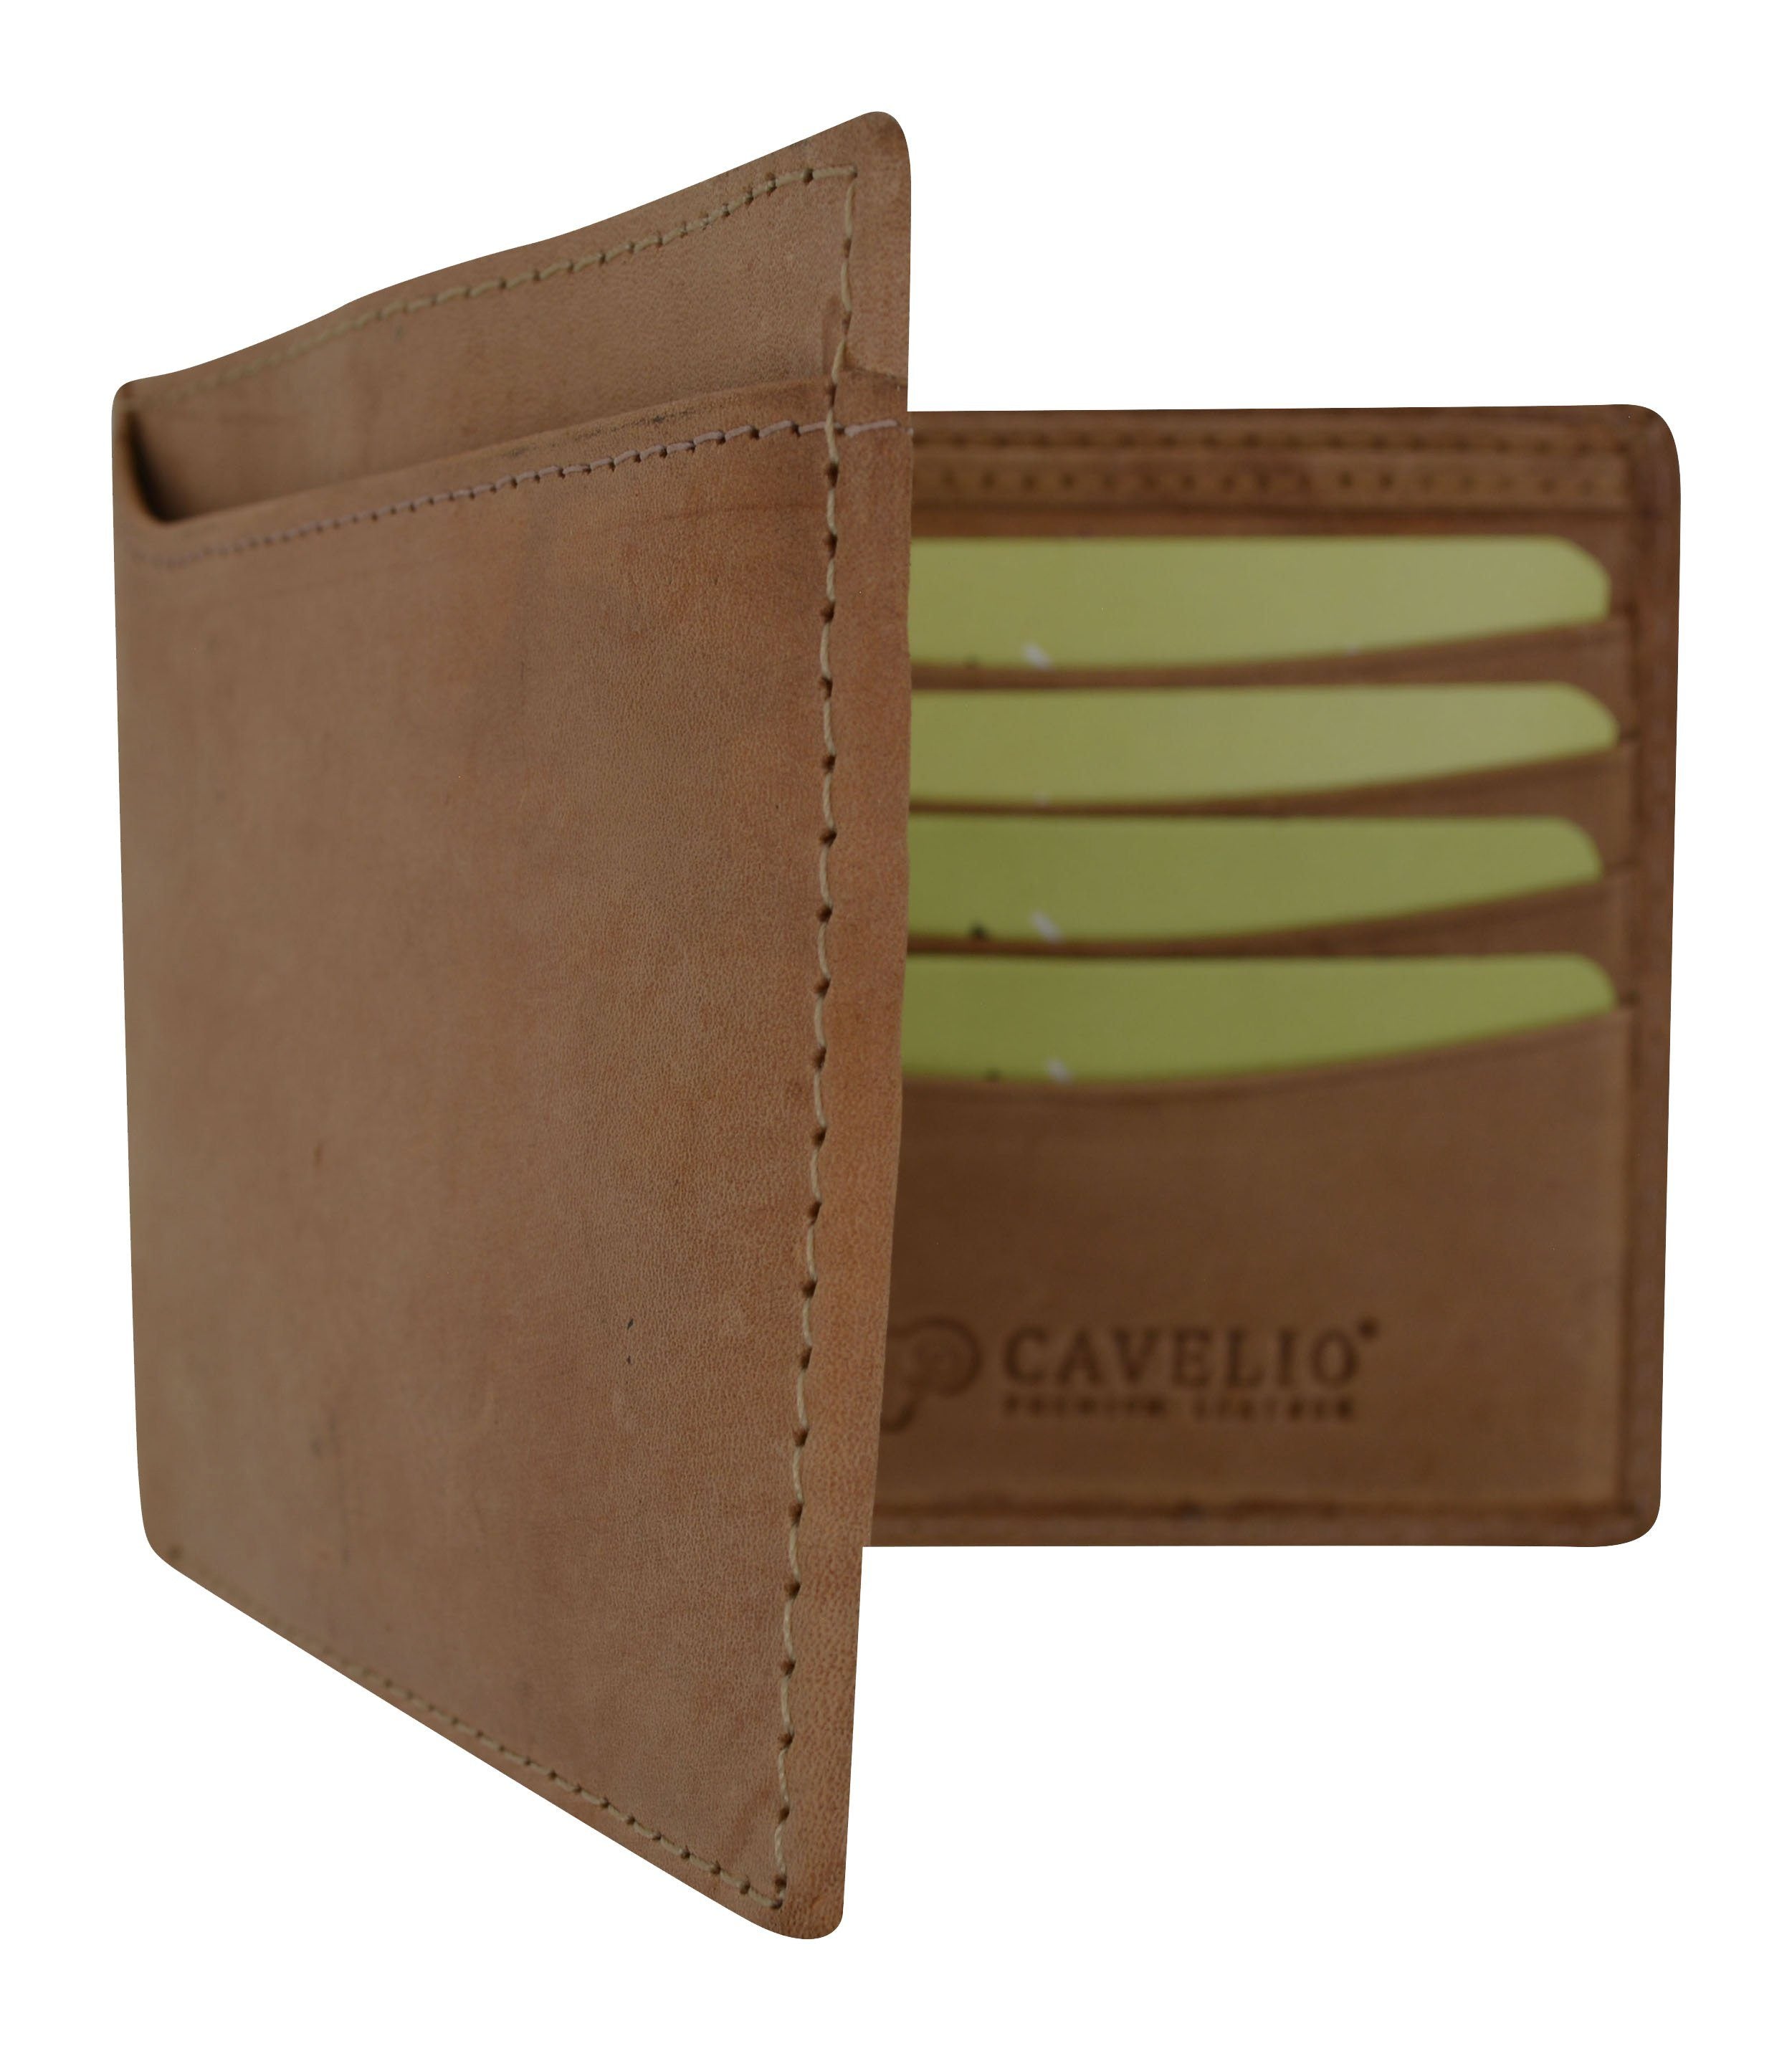 Removable ID Card Premium Leather Wallet